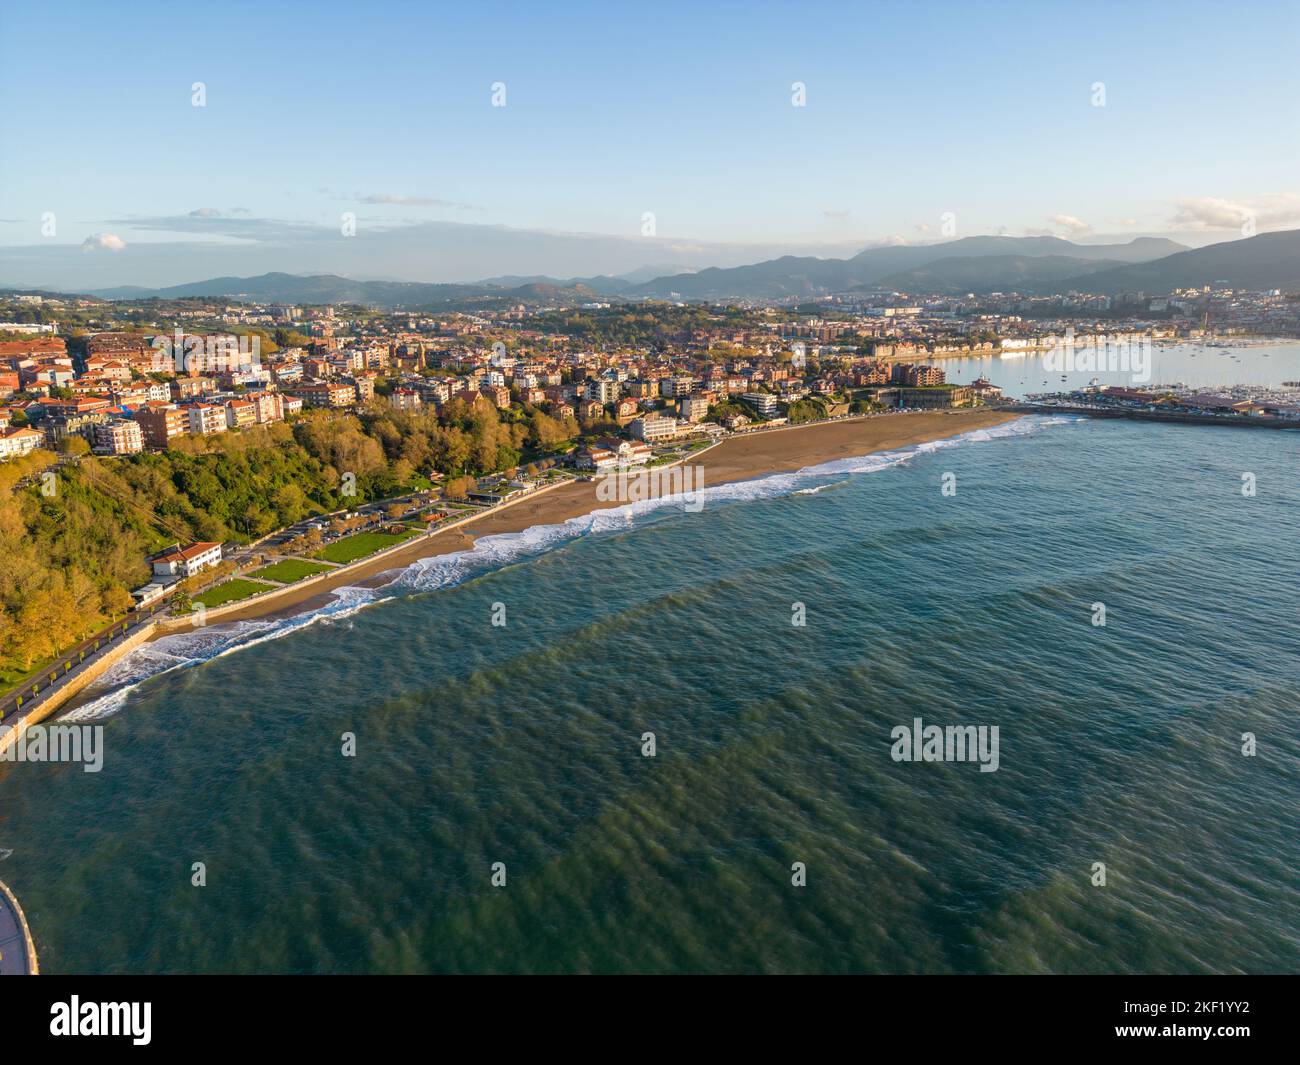 An aerial view of cityscape Basque  surrounded by buildings and water Stock Photo